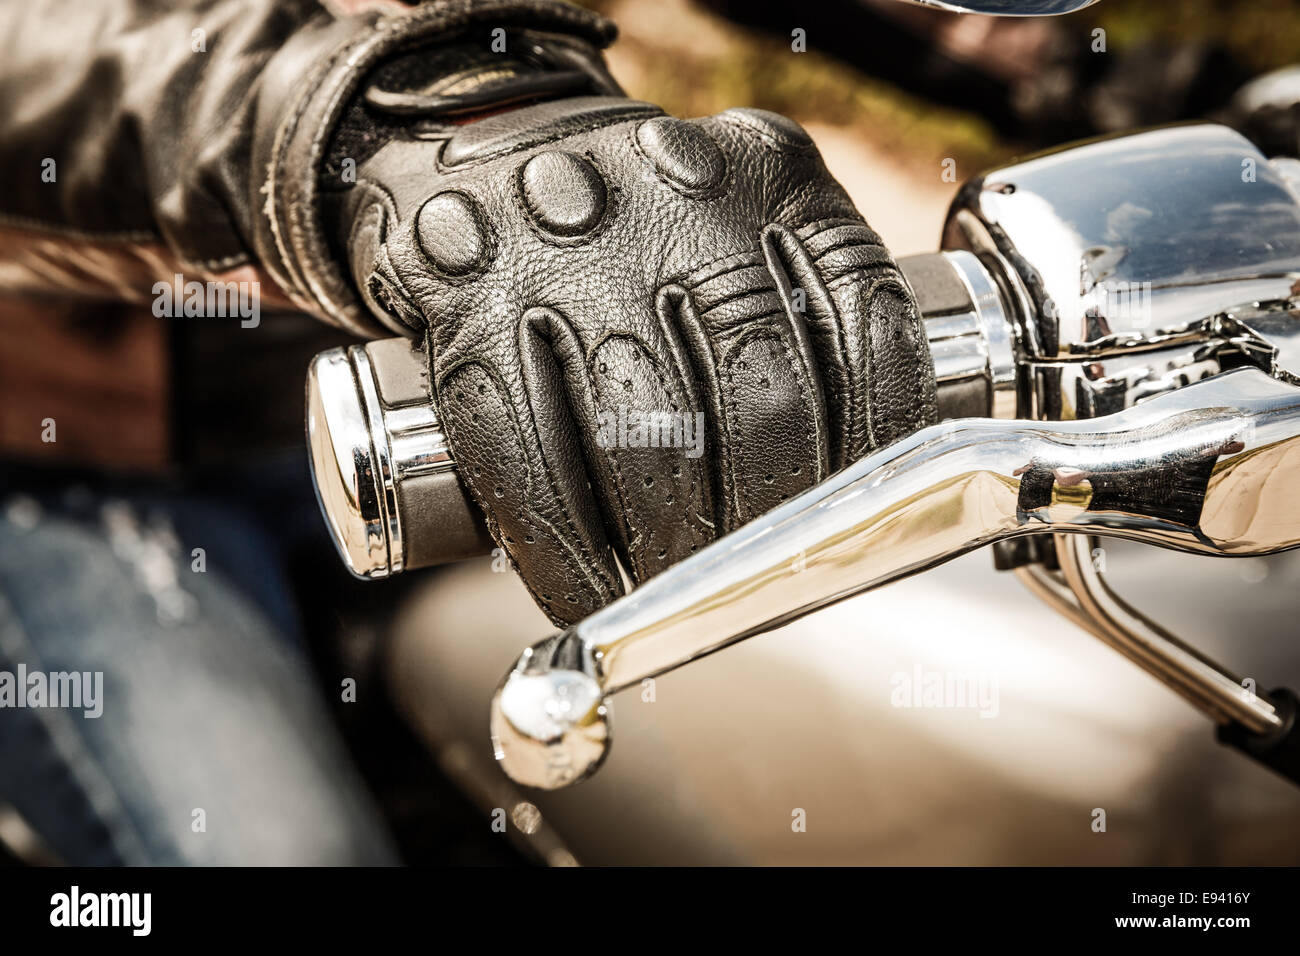 Human hand in a Motorcycle Racing Gloves holds a motorcycle throttle control. Hand protection from falls and accidents. Stock Photo